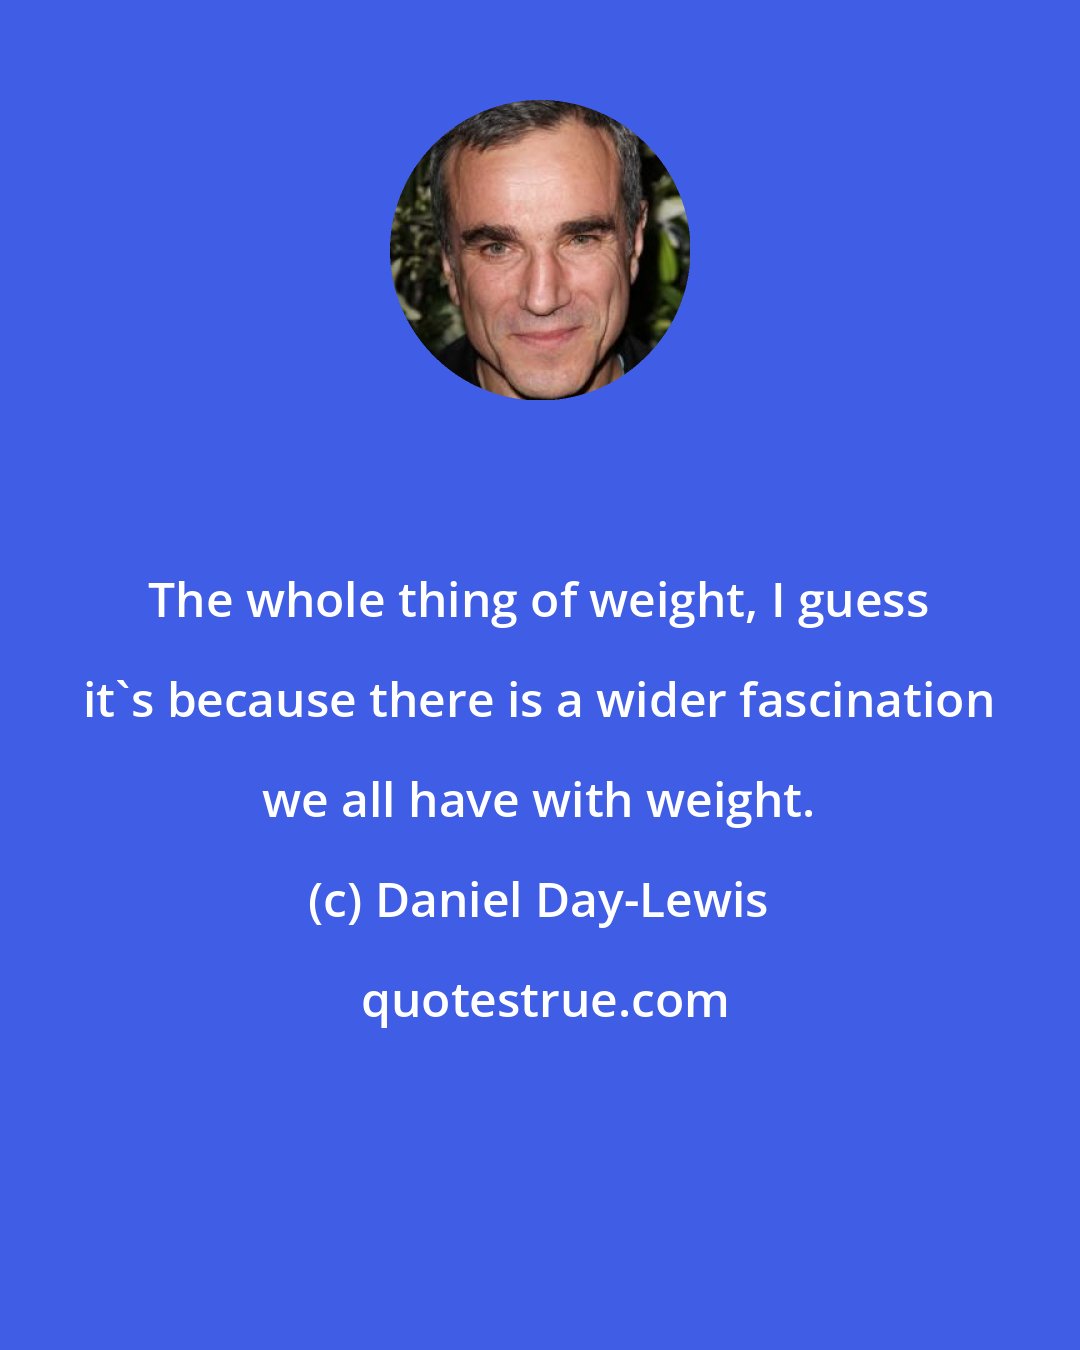 Daniel Day-Lewis: The whole thing of weight, I guess it's because there is a wider fascination we all have with weight.